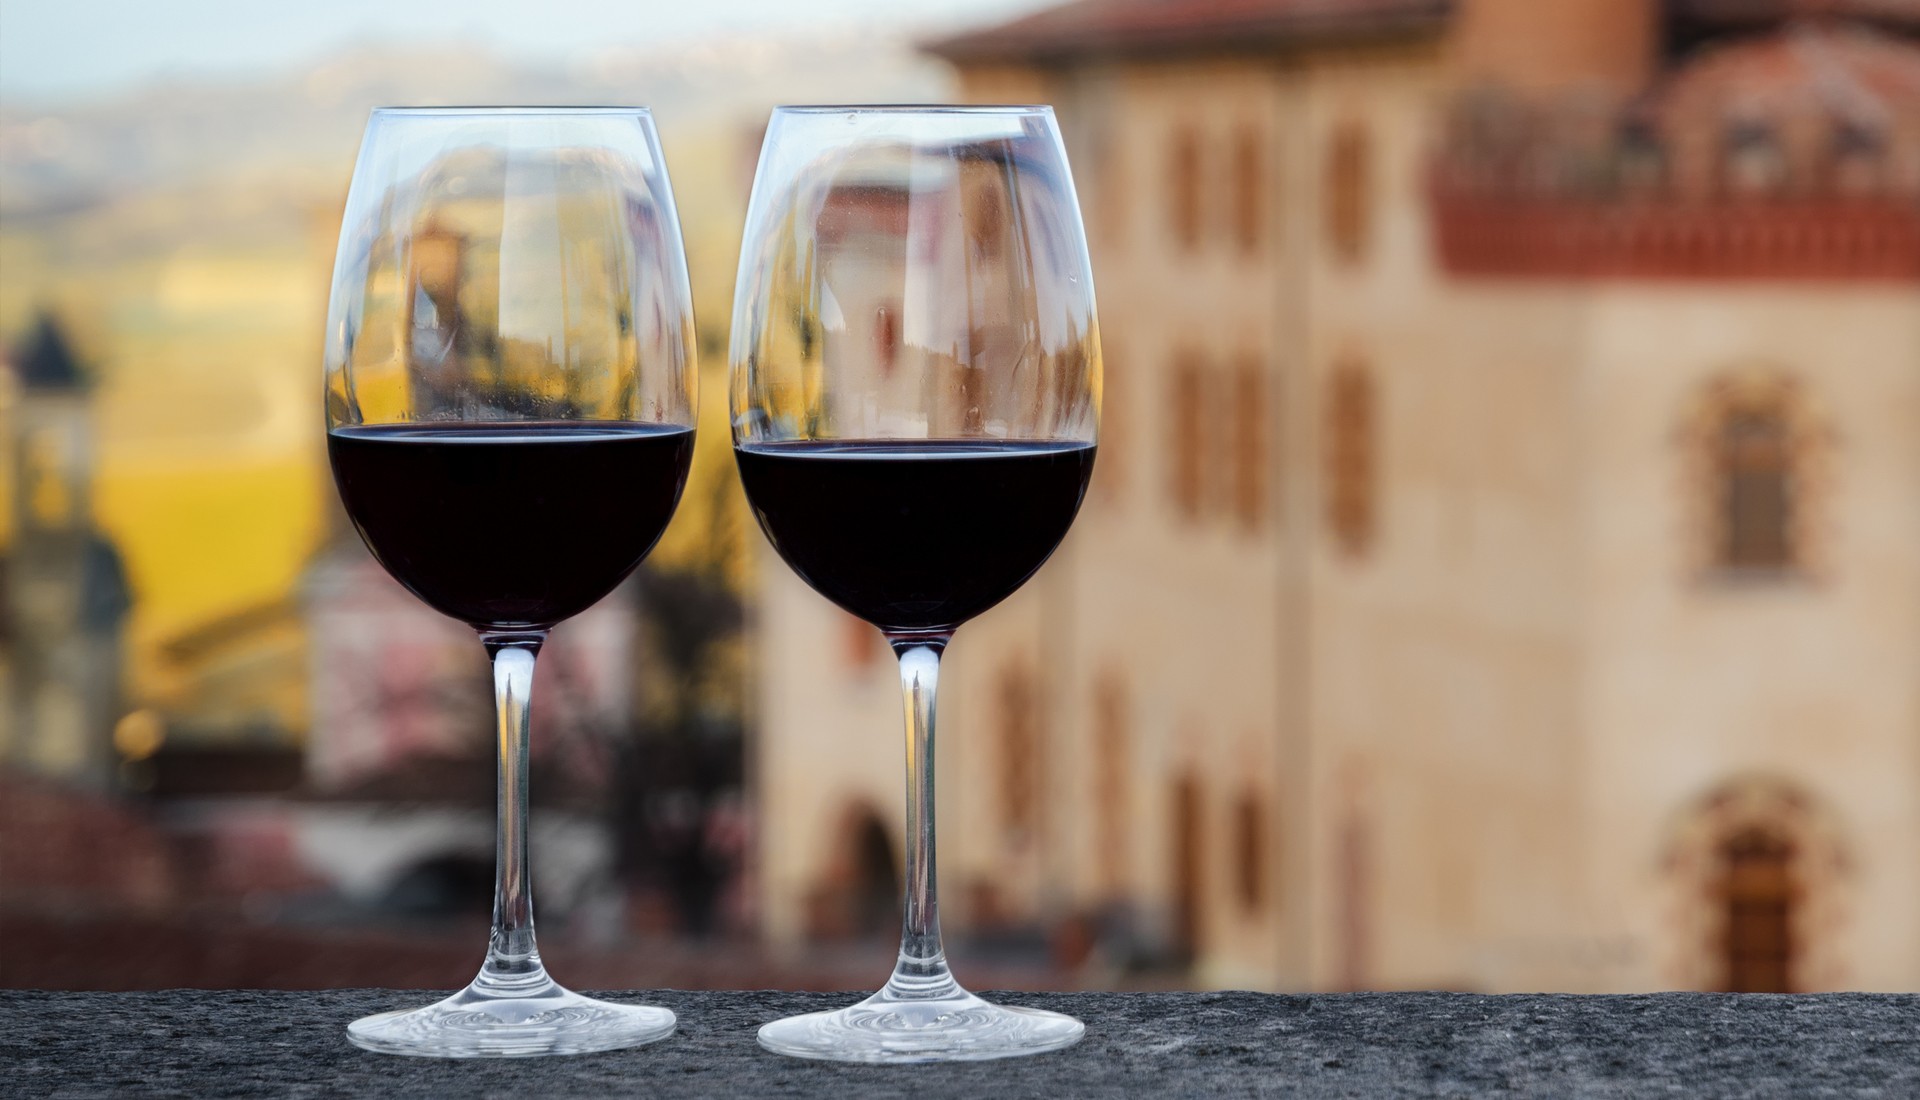 Wine Tasting: On-sight, nearby, or further afield